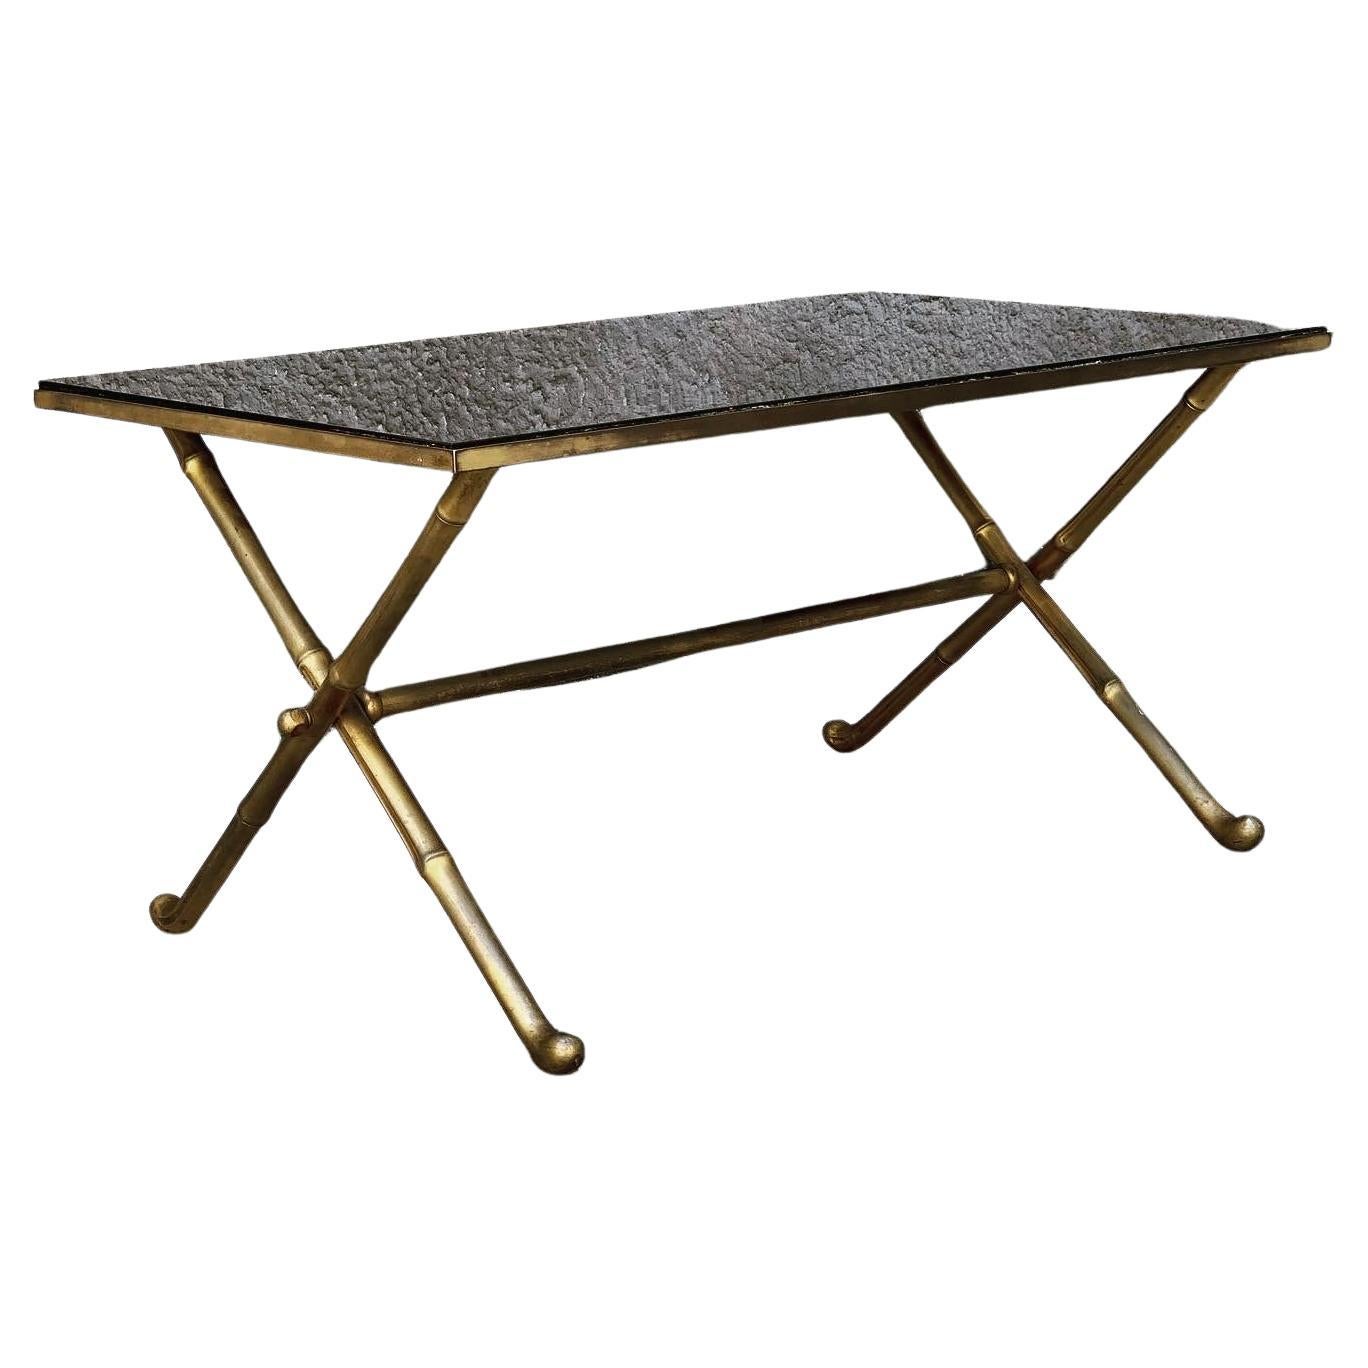 talian Gilt Brass Faux Bamboo Coffee Table with Black Opaline Glass Top, 1960s For Sale